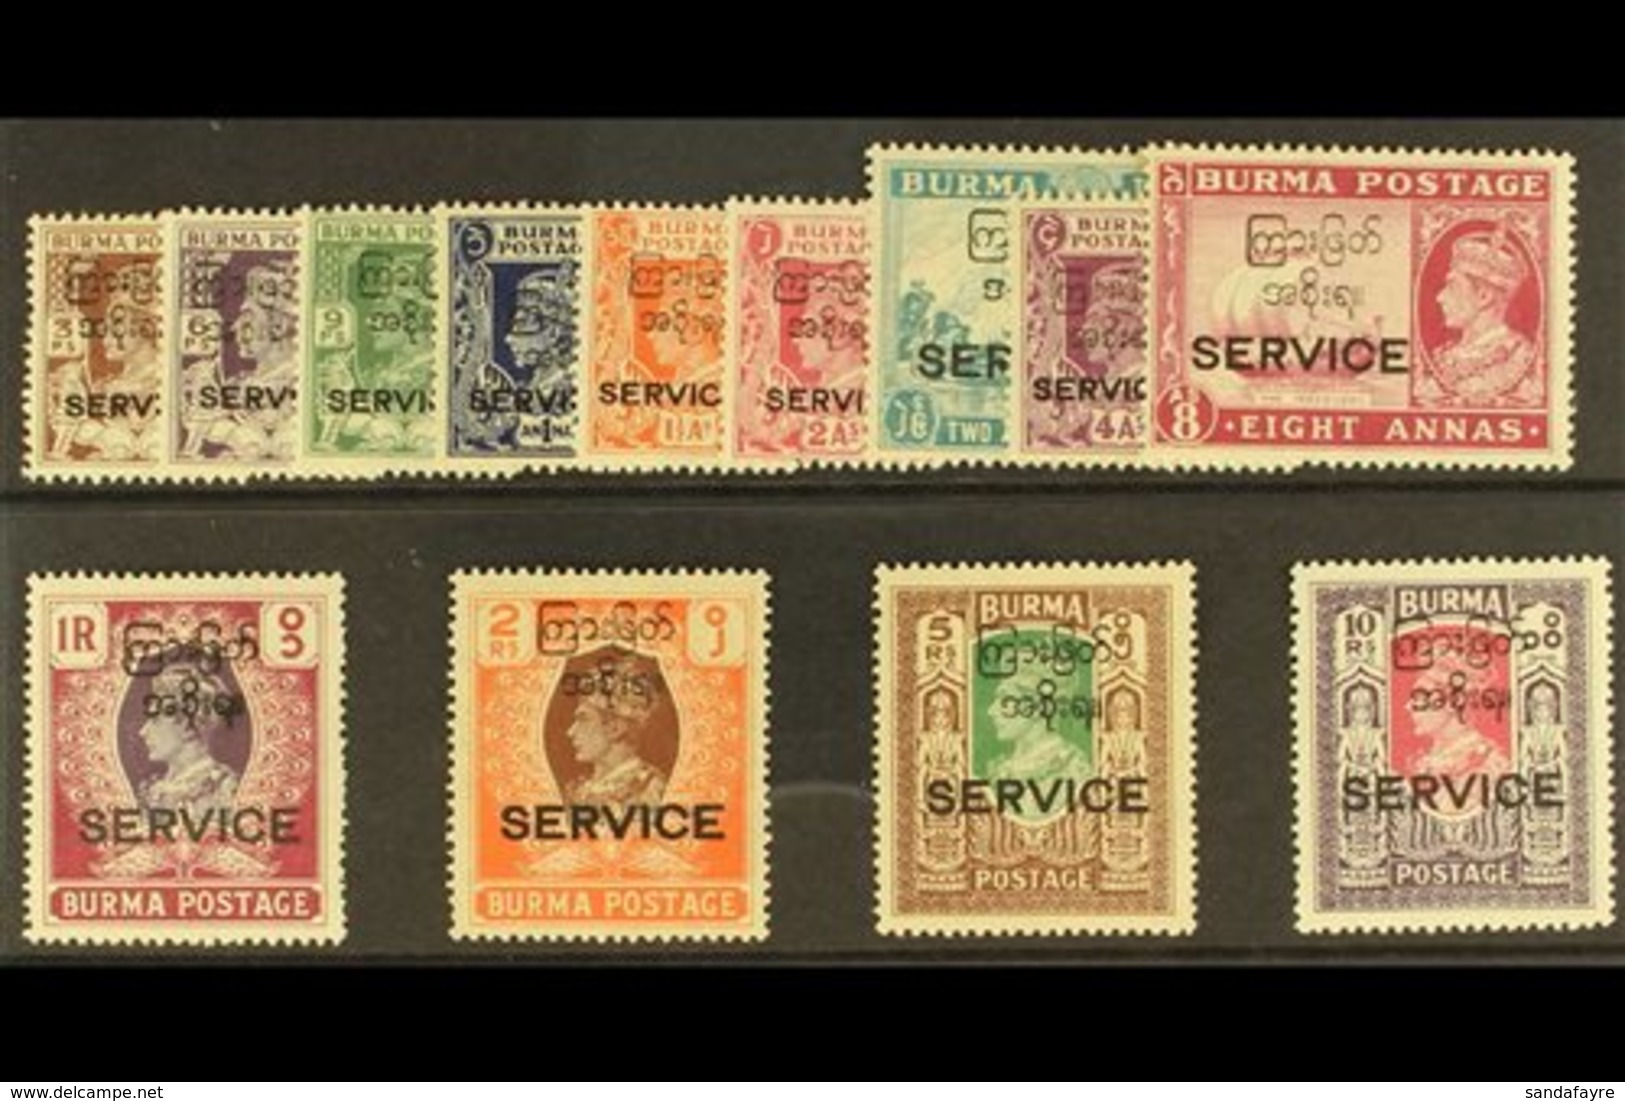 OFFICIALS 1947 Interim Government Overprinted Set Complete, SG 68/82, Never Hinged Mint, The 10r Top Value Lightly Hinge - Birmania (...-1947)